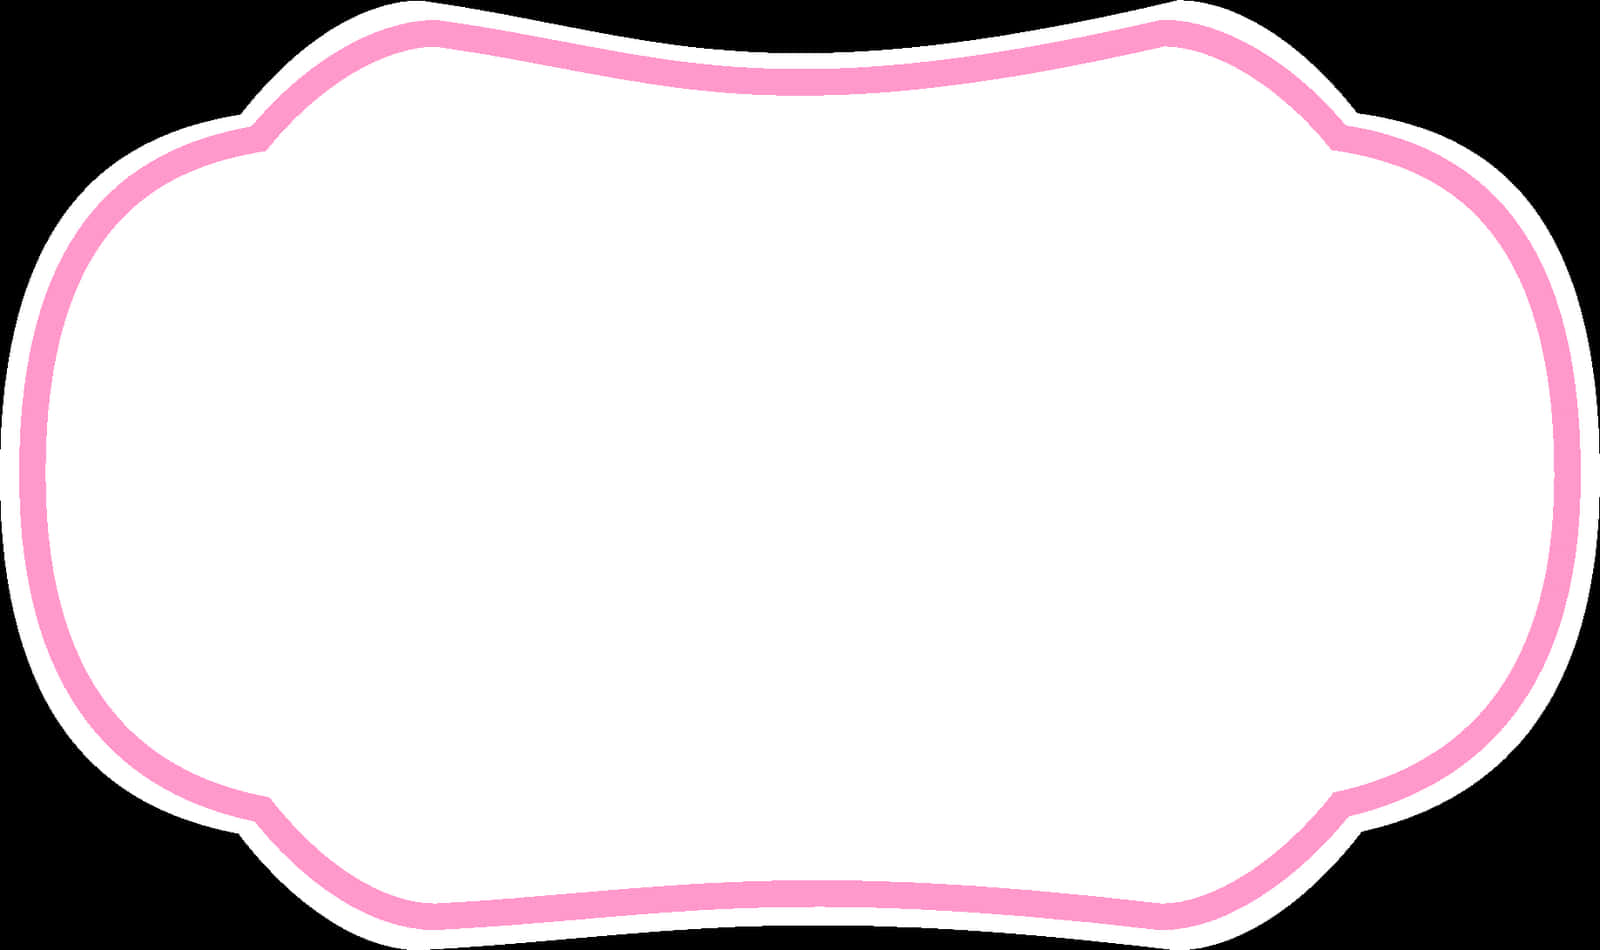 A White And Pink Frame